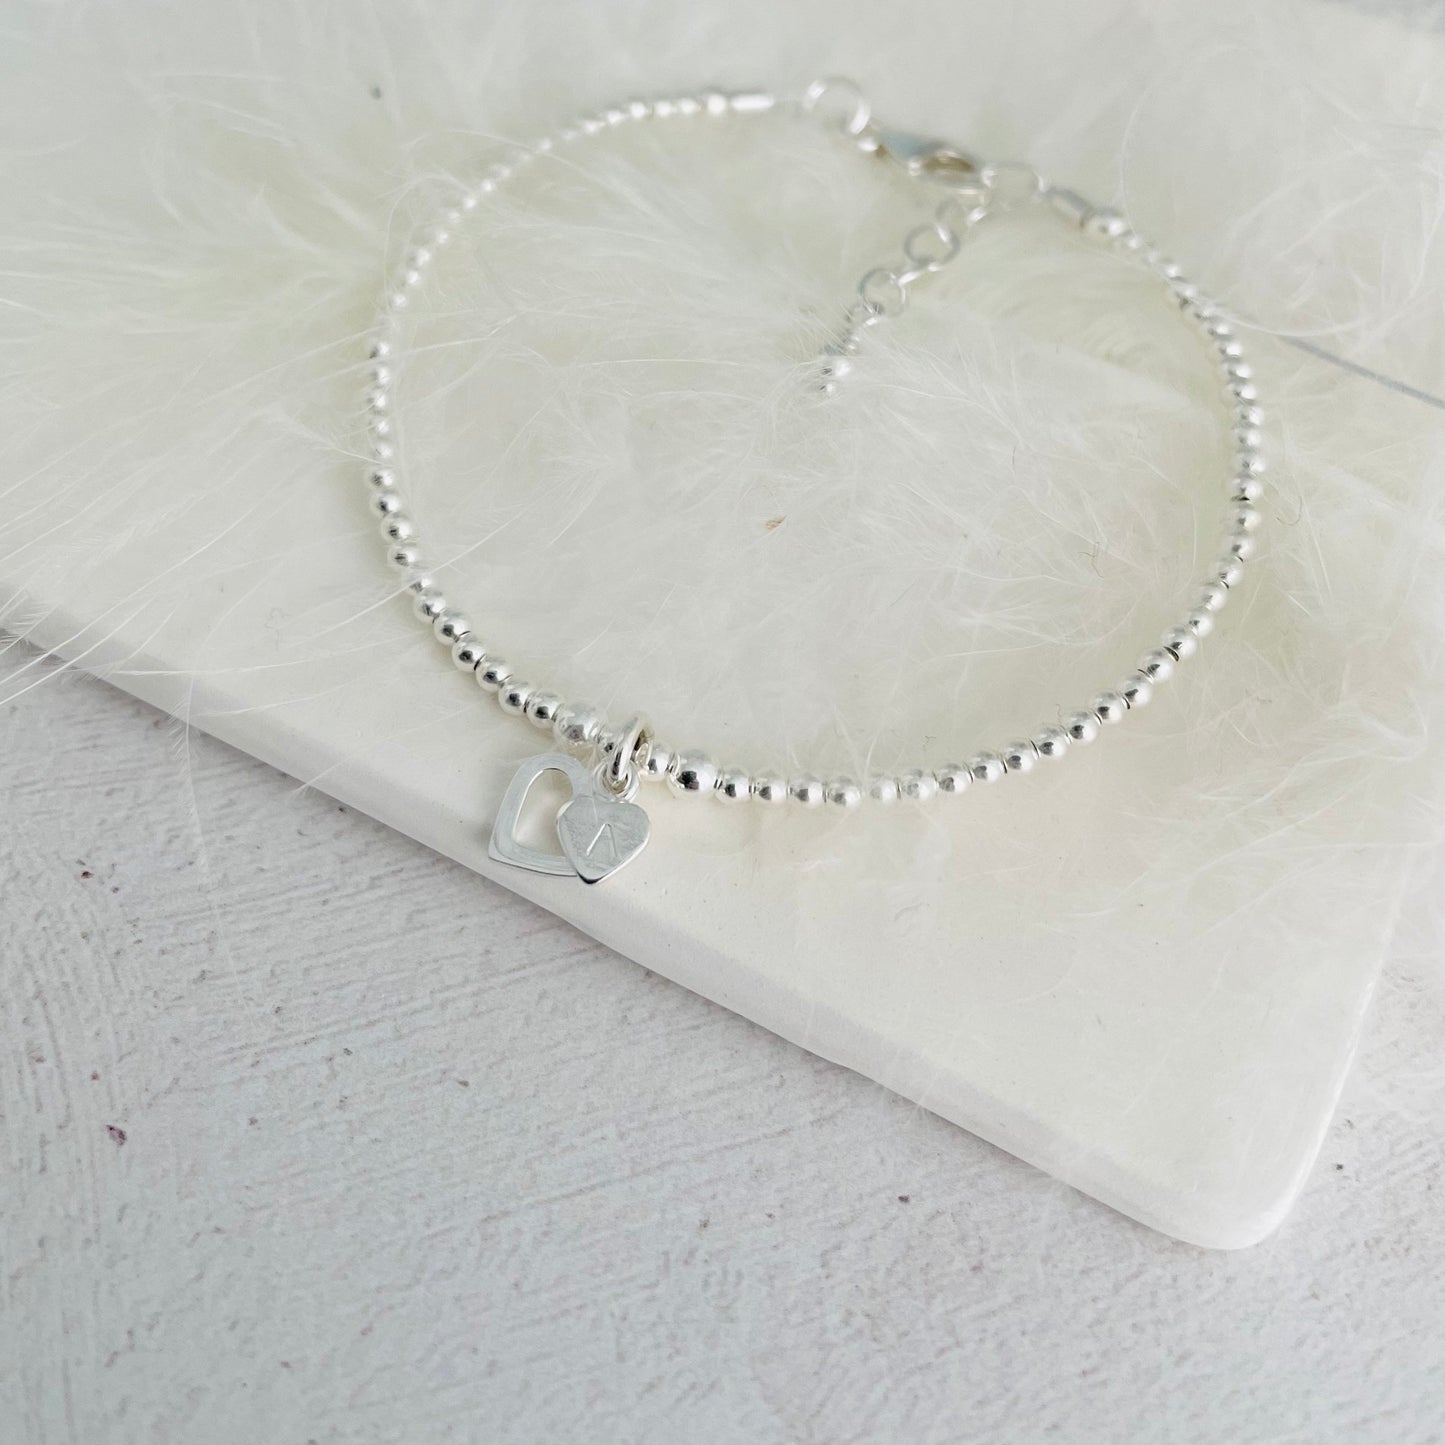 Delicate Open Heart Personalised Bracelet with initial in sterling Silver